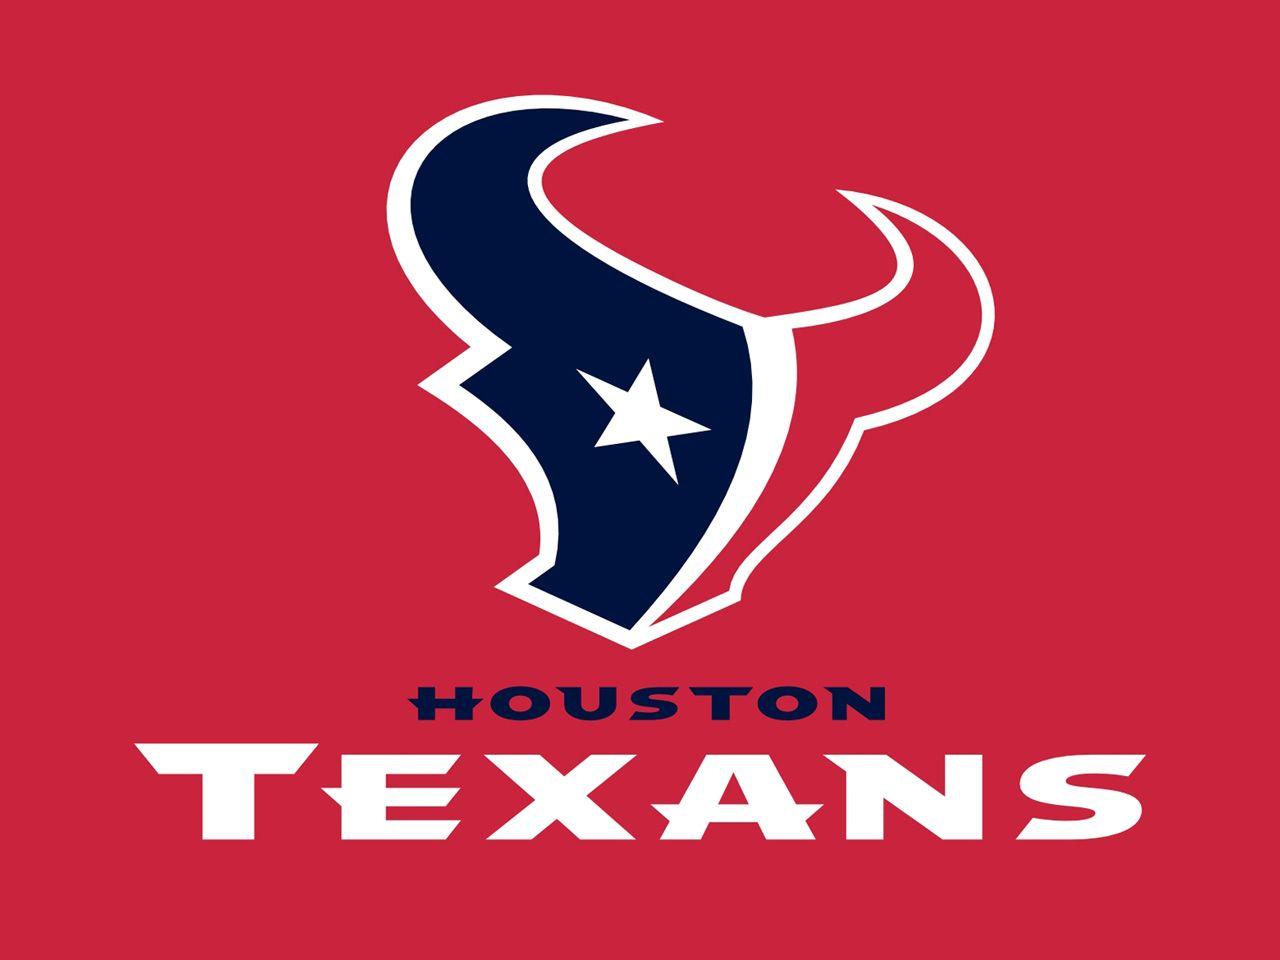 Houston Texans Wallpapers Archives